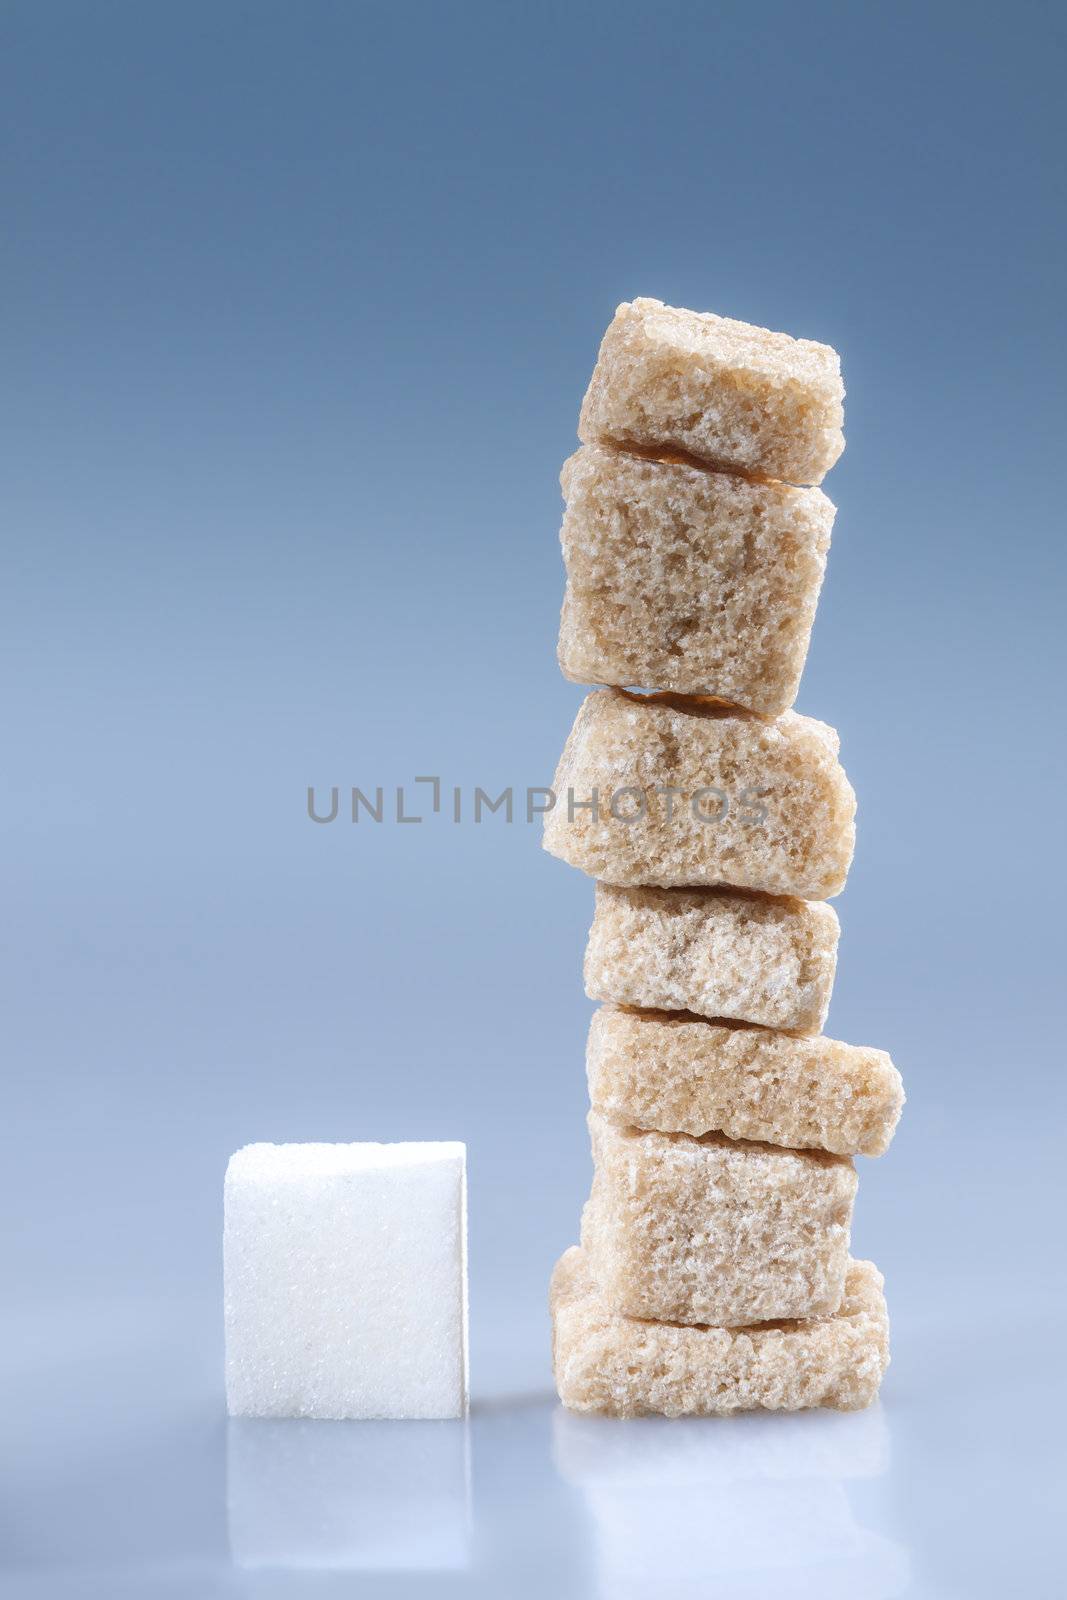 Vertical stack of brown and white sugar cubes on blue.